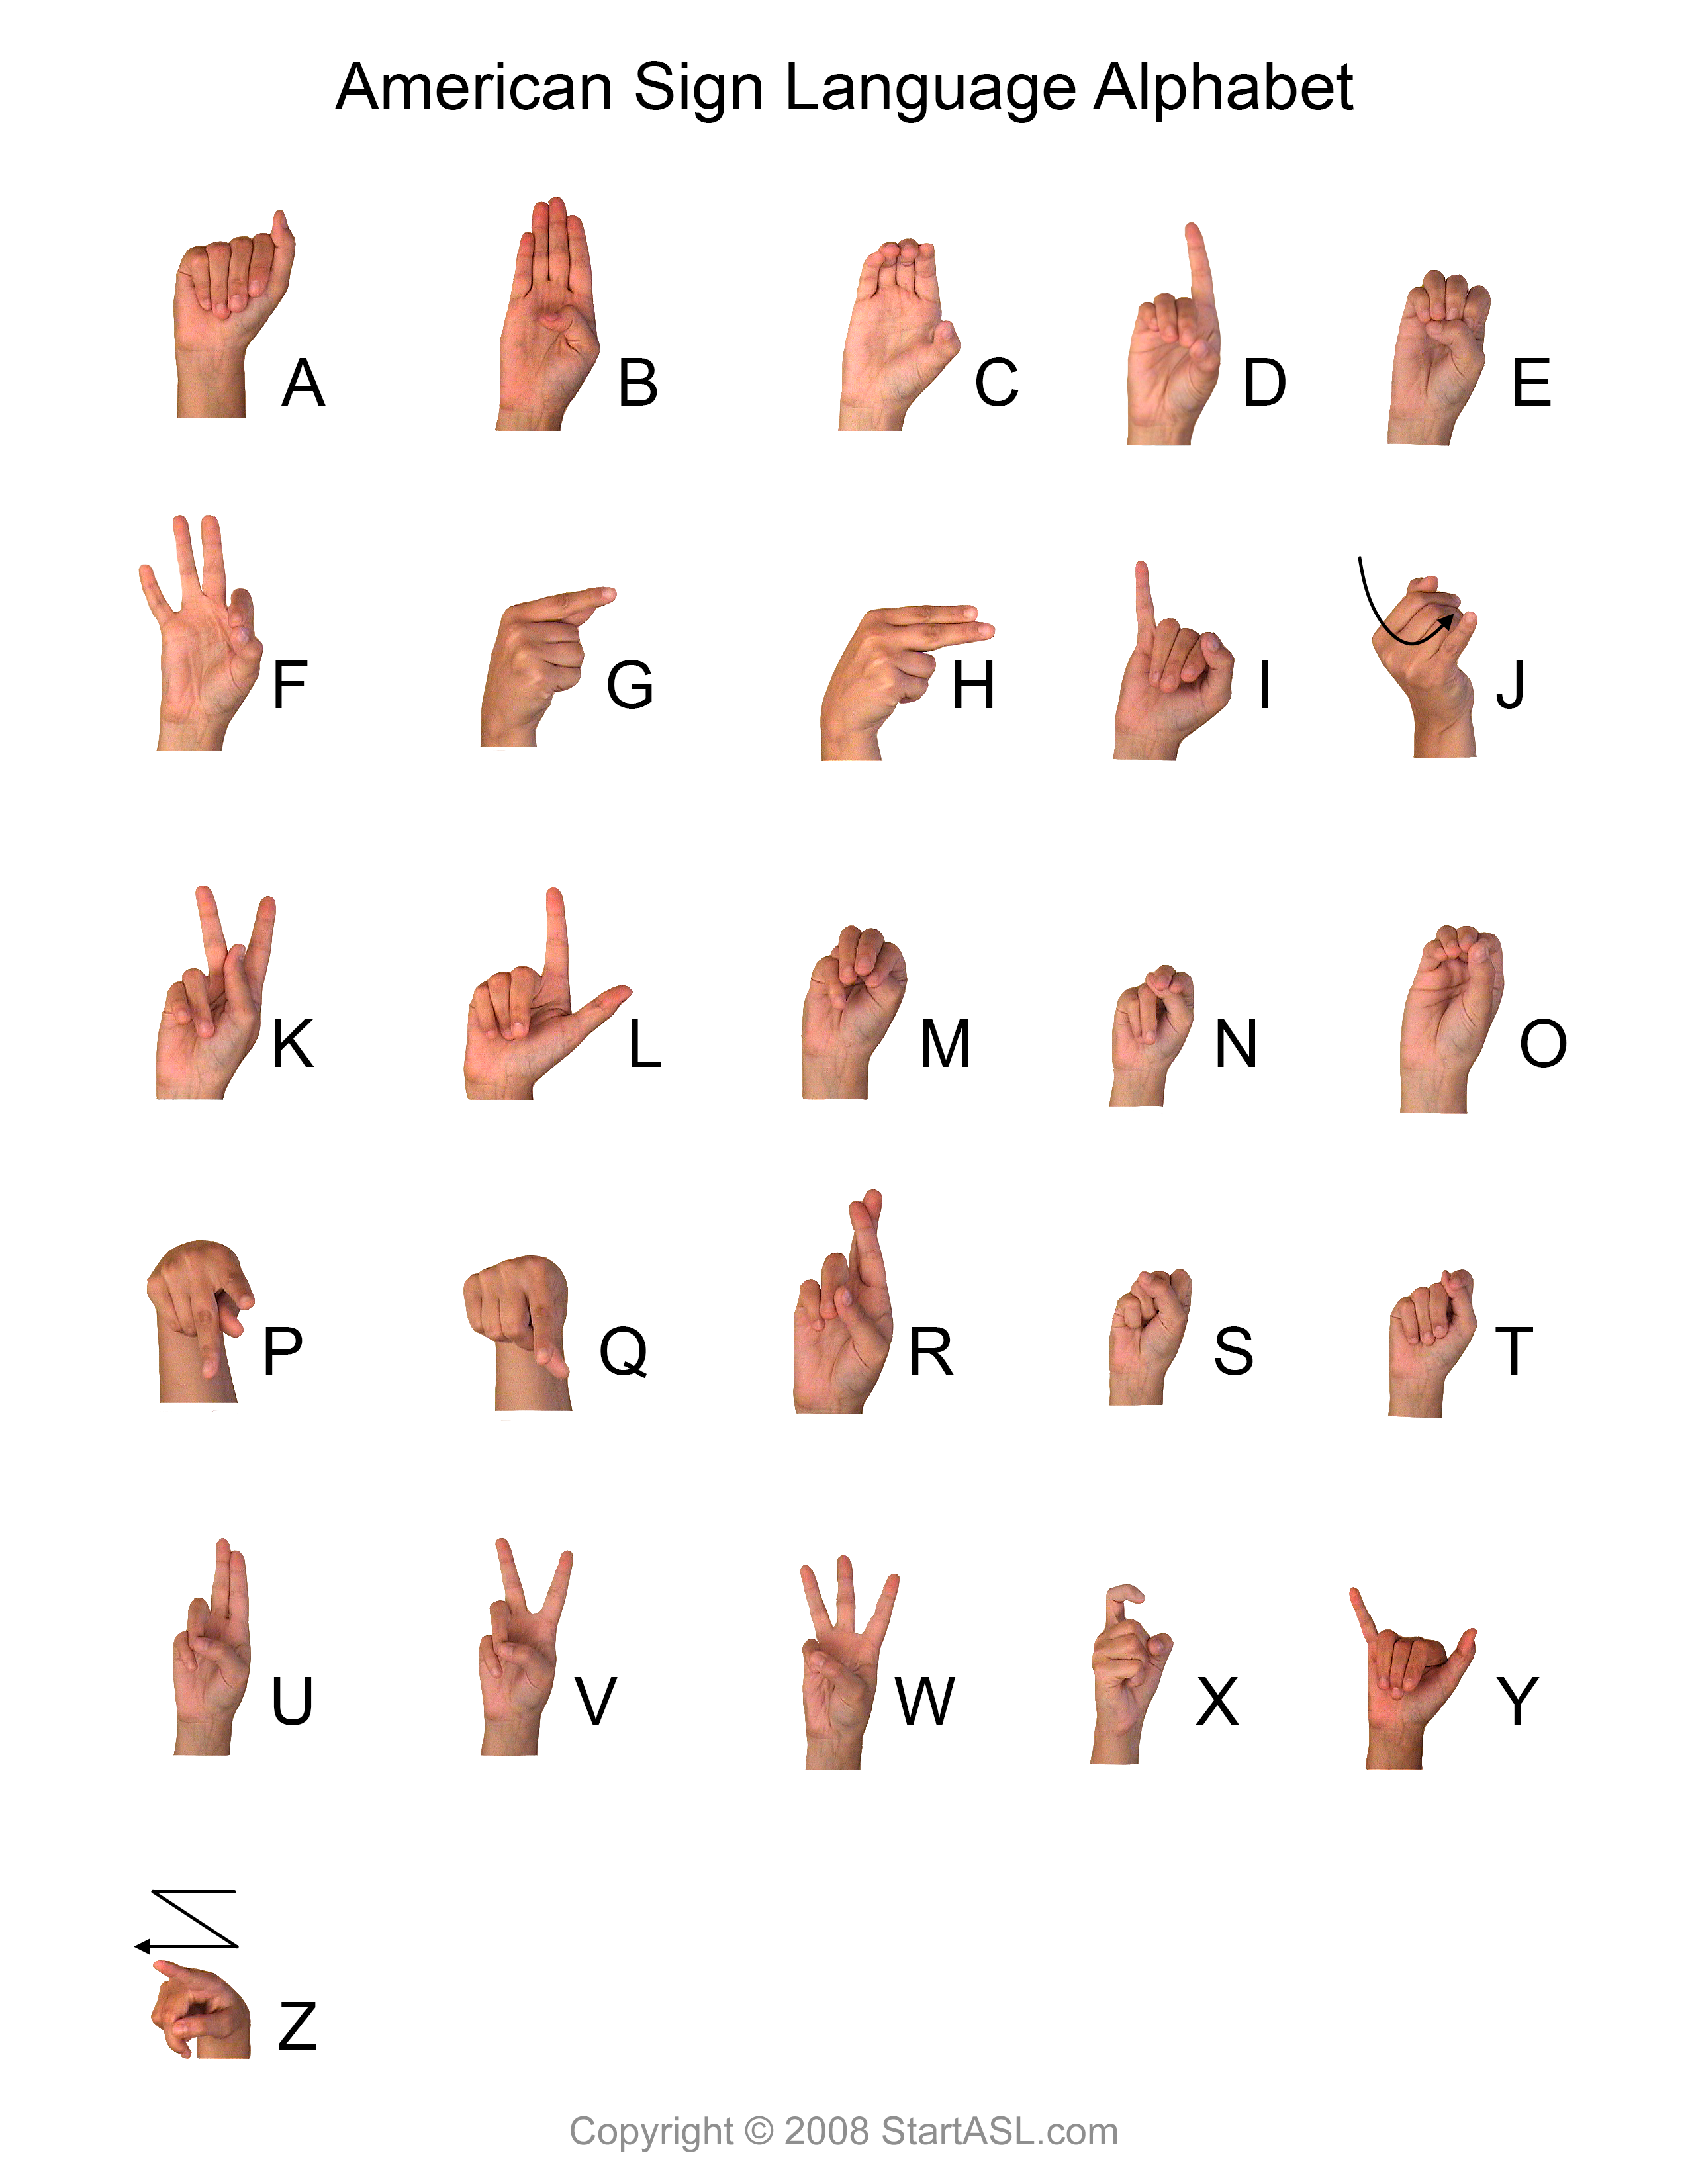 sign-language-alphabet-6-free-downloads-to-learn-it-fast-start-asl